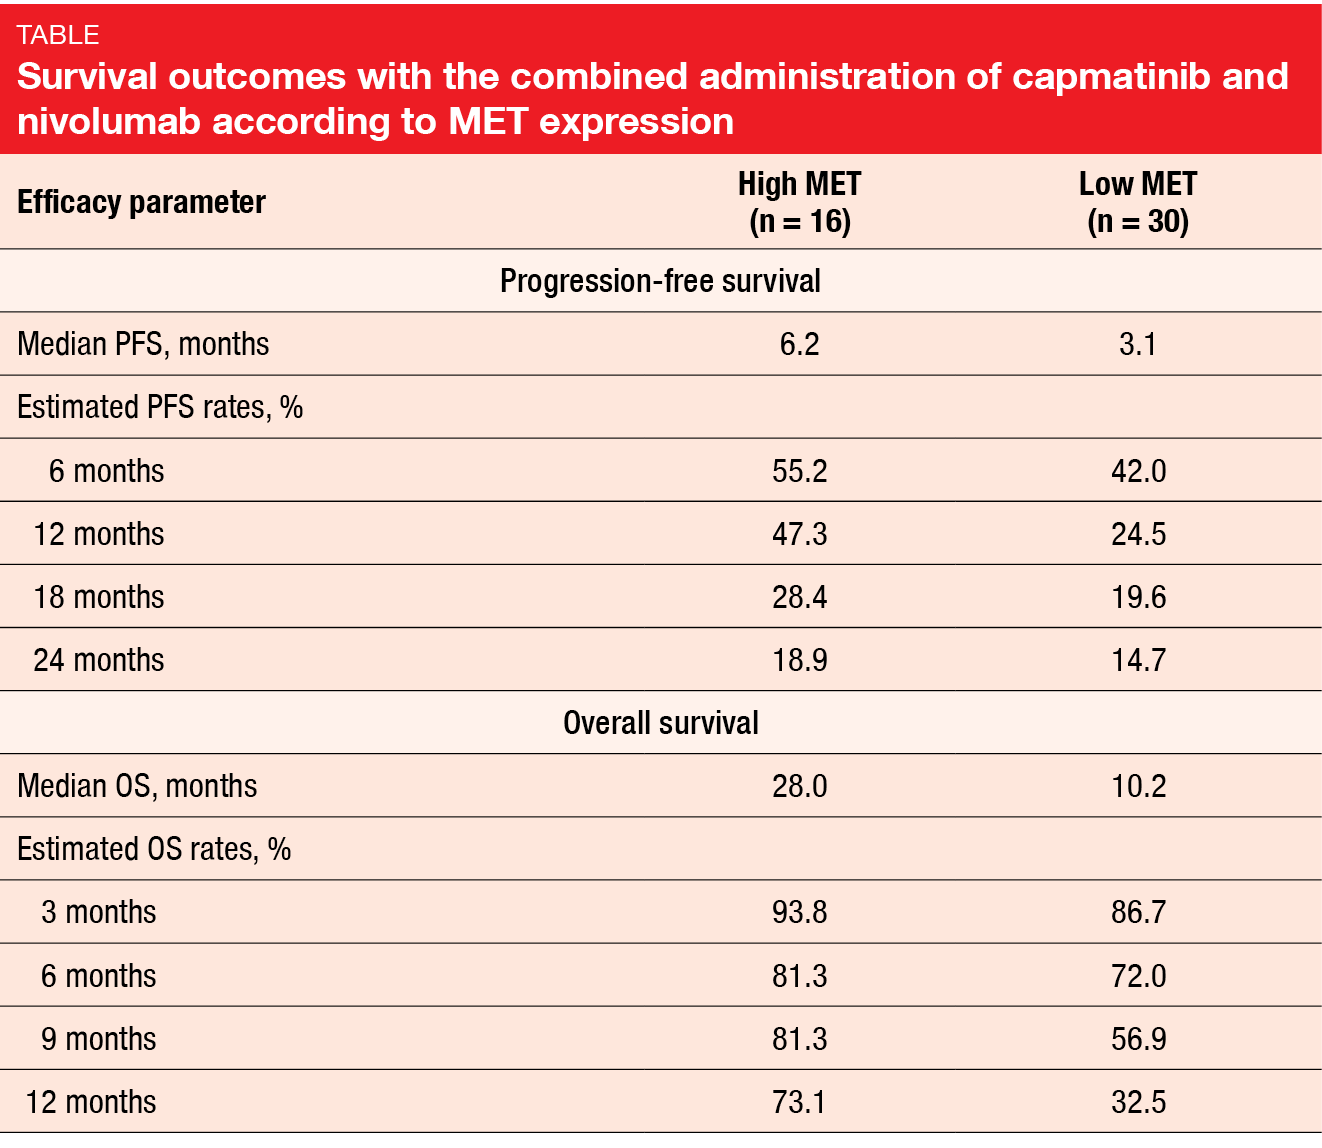 Table: Survival outcomes with the combined administration of capmatinib and nivolumab according to MET expression